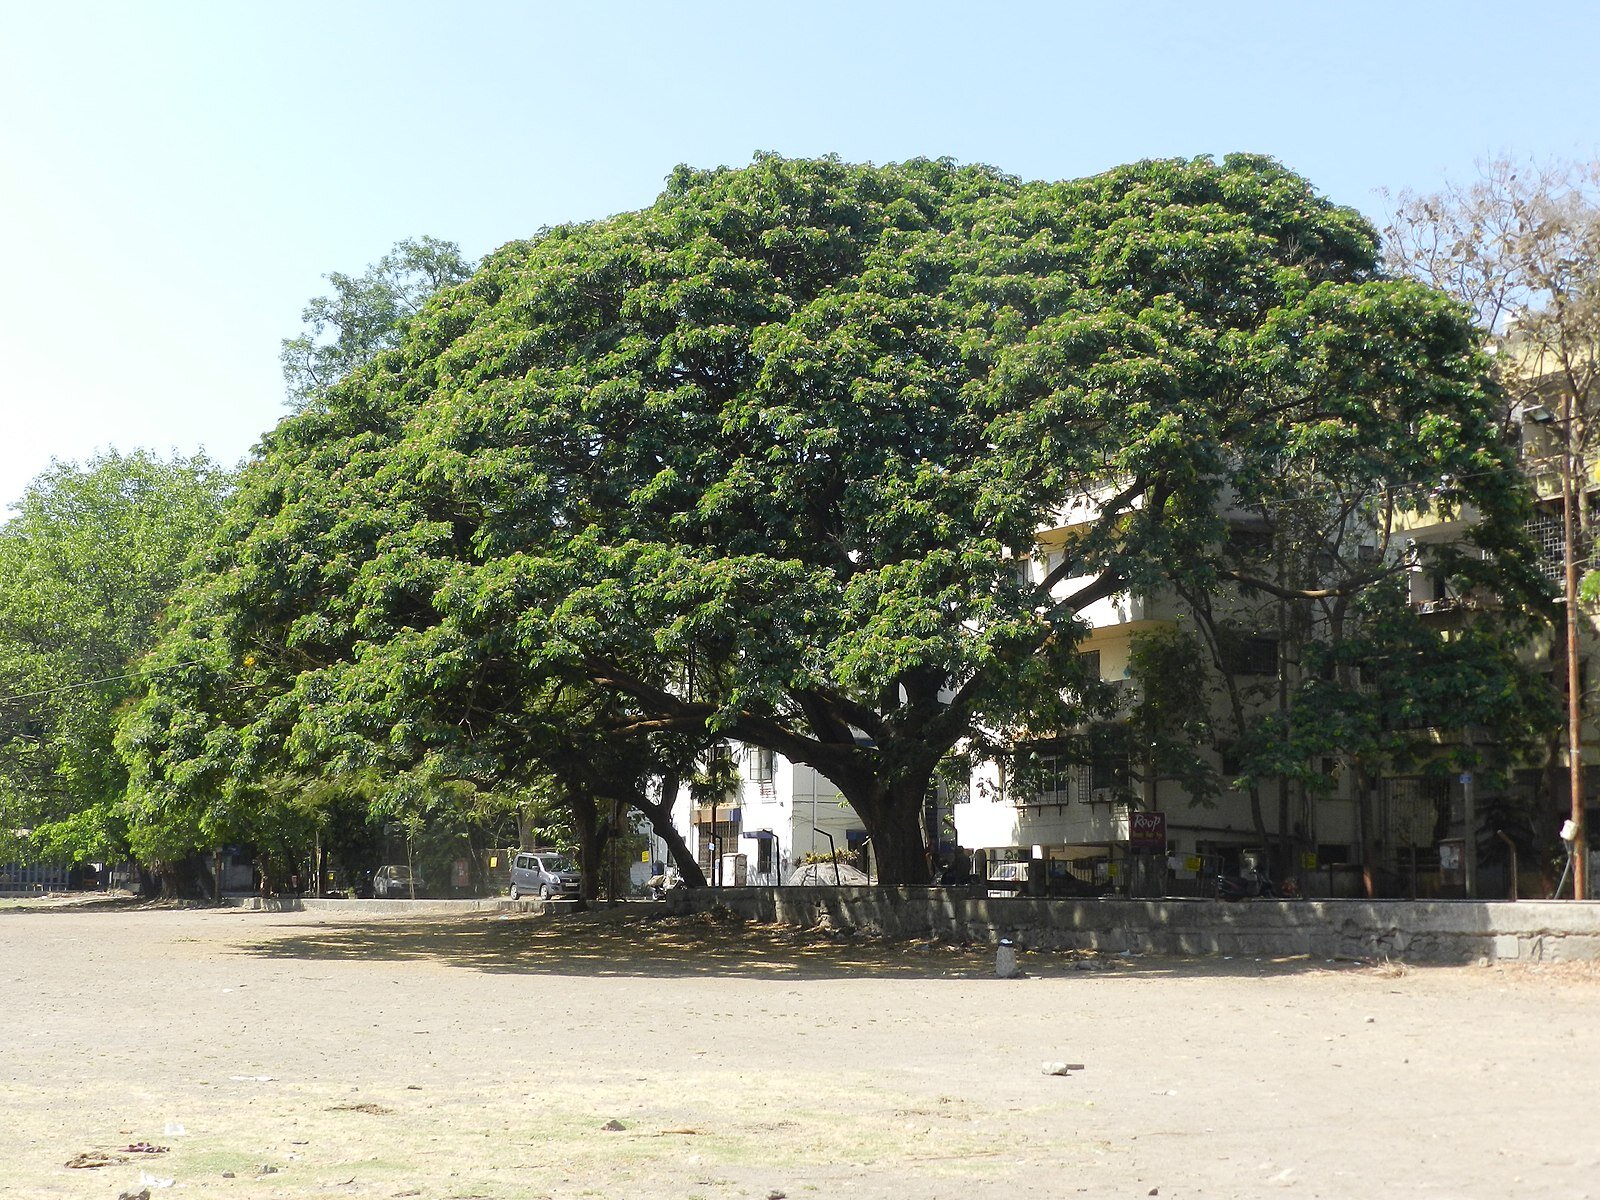 Prized 750-ton rain tree moved to new home—critics fear it won’t survive.